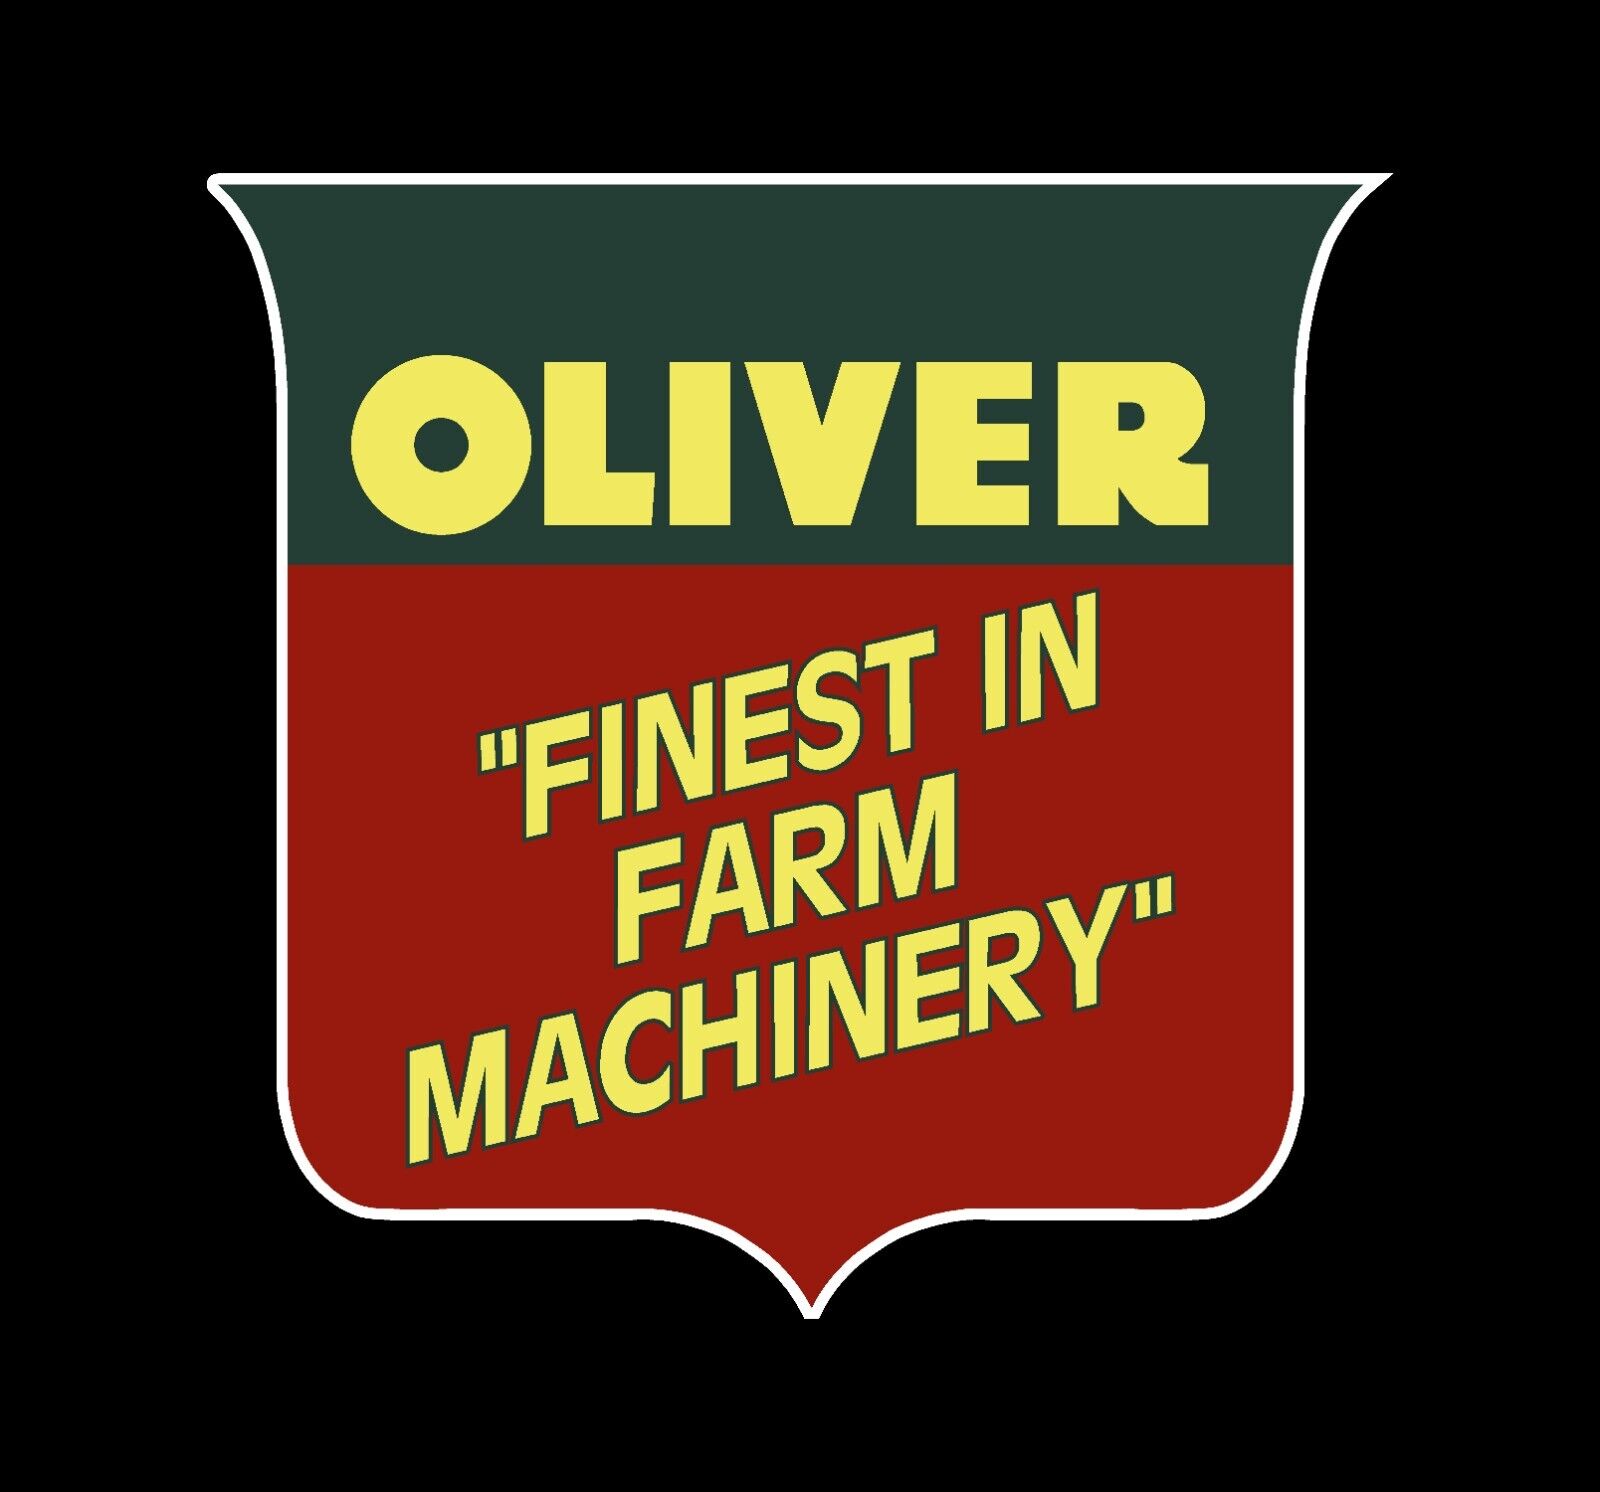 Oliver Tractor Finest In Farm Machinery Vintage Recreated Tractor Emblem Sticker